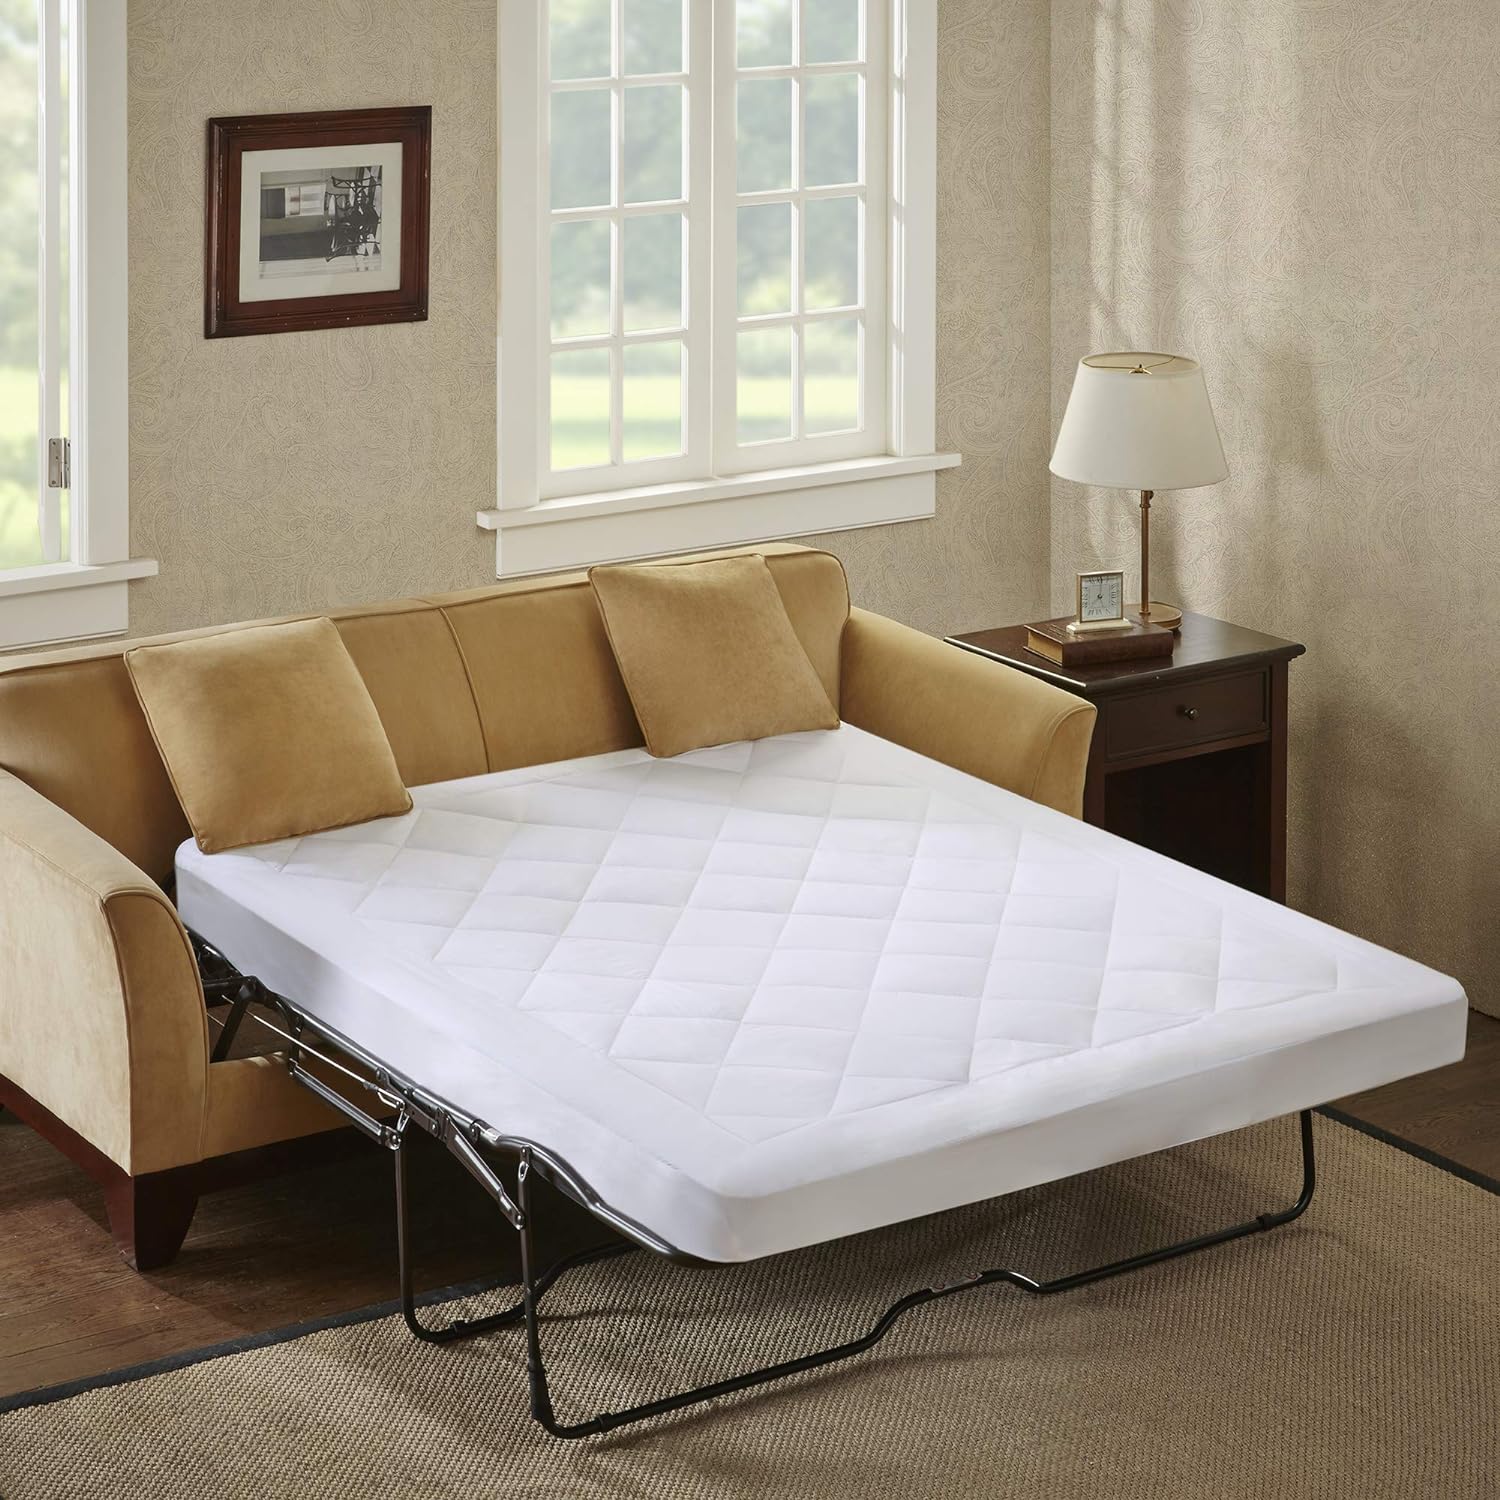 Queen Sofa Bed Mattress From Sears Com